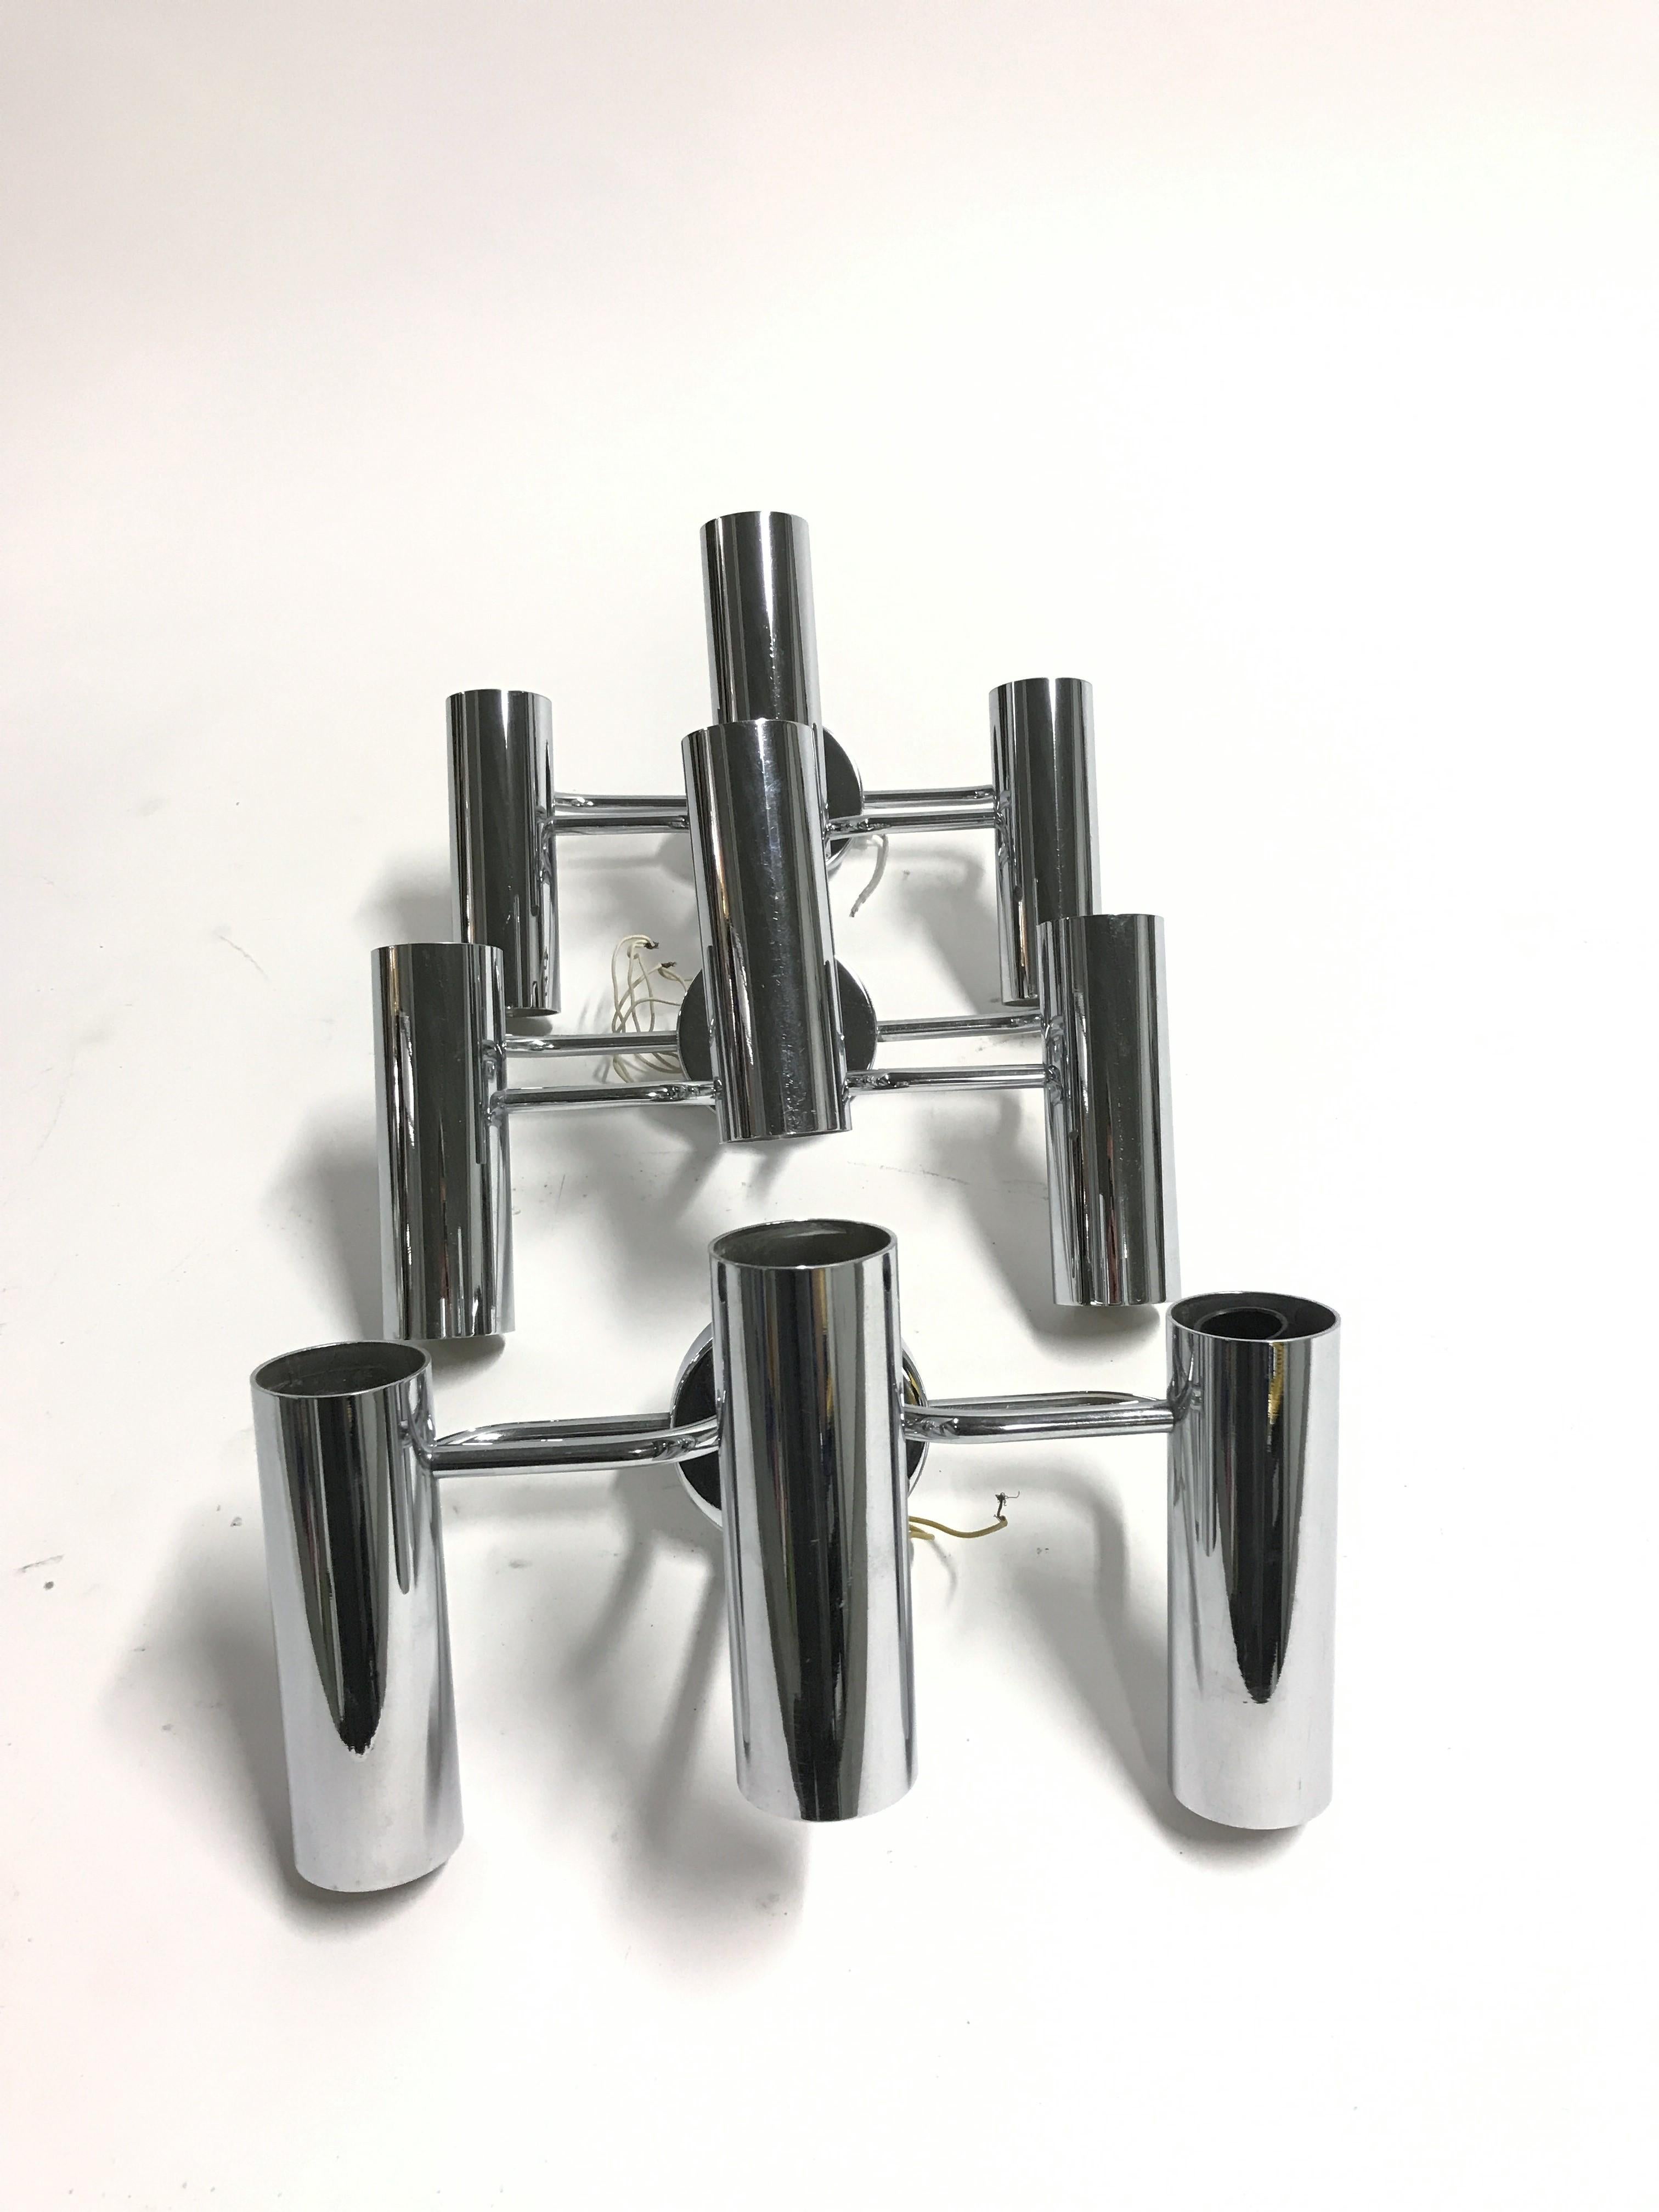 Vintage chrome 3 lightpoint wall lights designed by Gaetano Sciolari for Boulanger.

The lights are in very good condition and fit in perfectly with moderns day interiors.

Perfect shiny chrome.

1970s - Italy 

Tested and ready for use. The